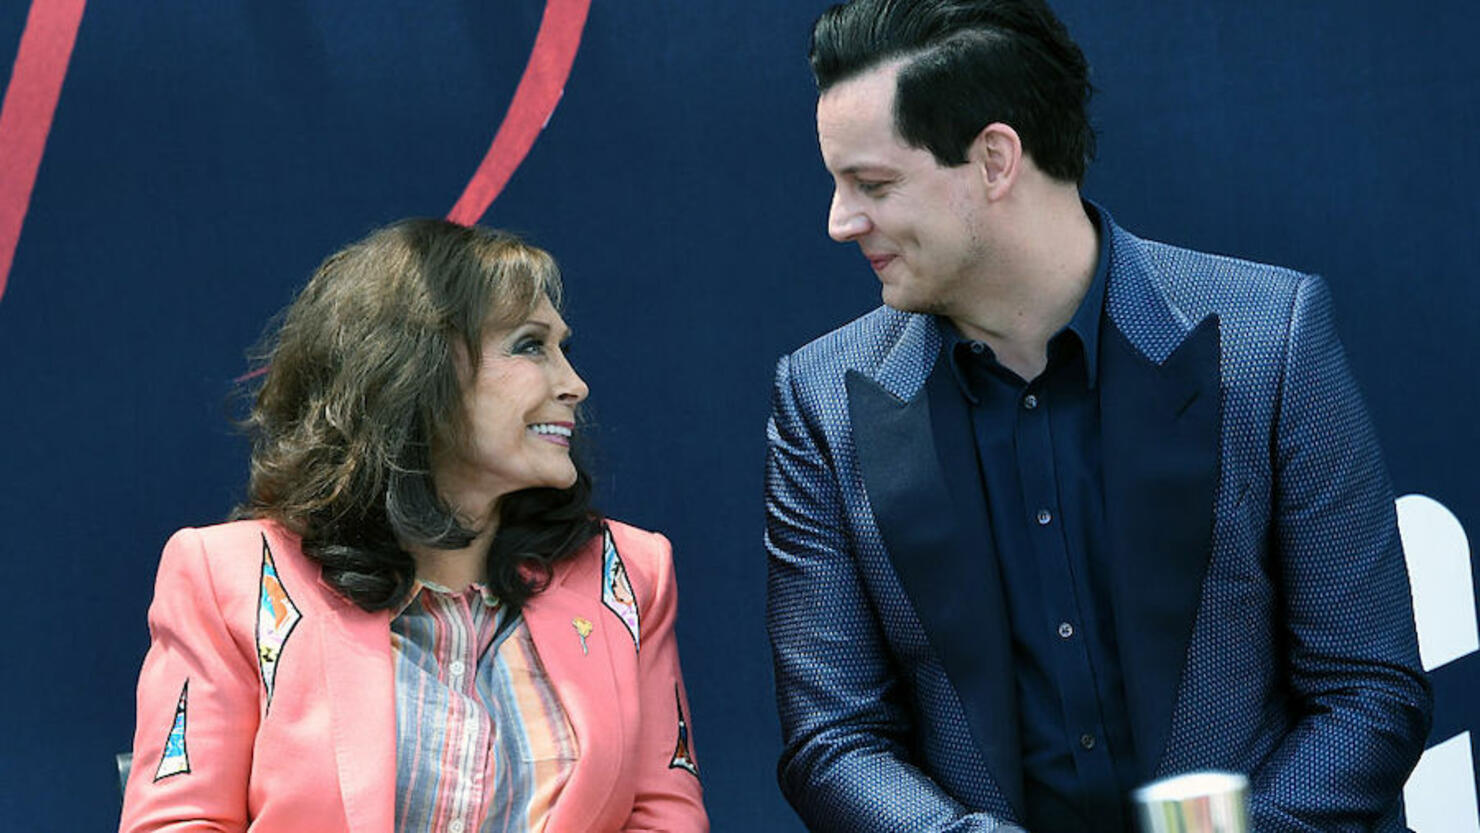 Loretta Lynn and Jack White Inducted Into The Nashville Walk Of Fame